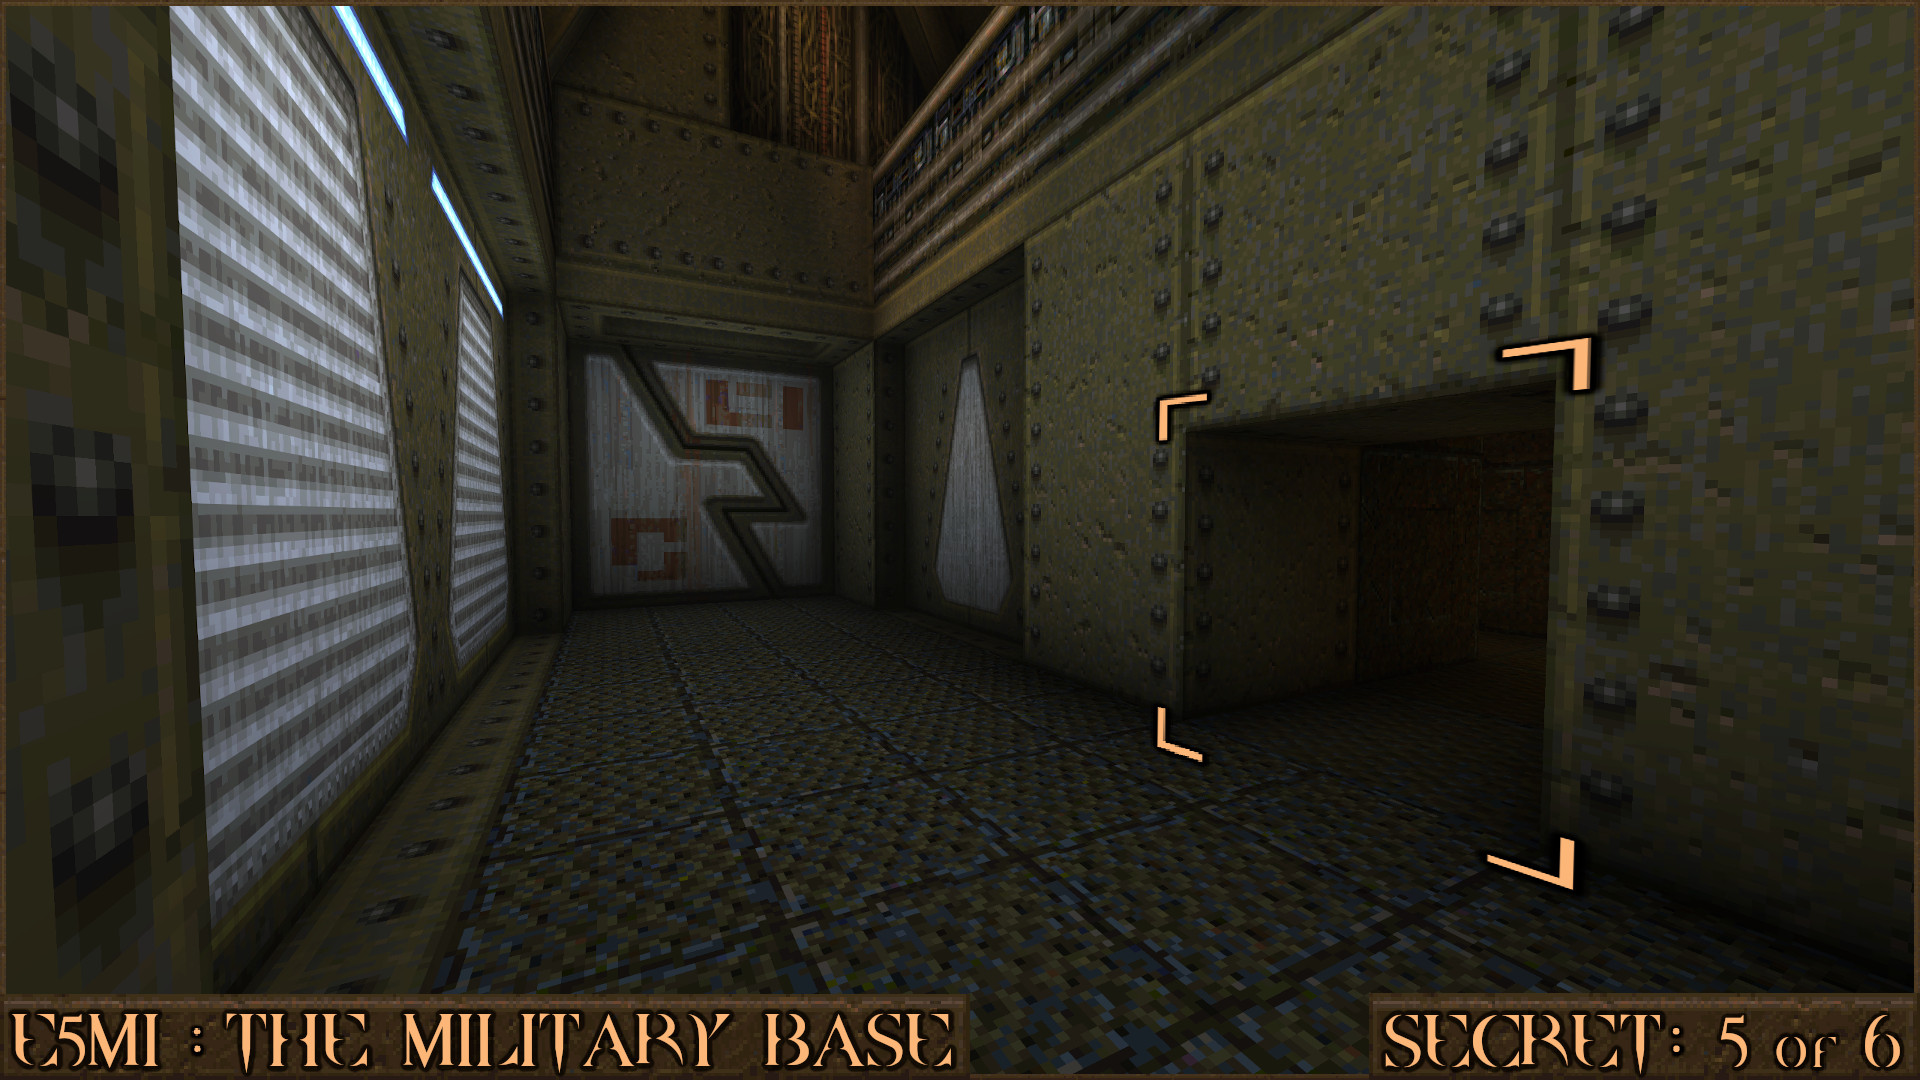 Quake Finding All Secrets in Quake Expansion pack: Dimension of the Past - E5M1: The Military Base - 32CA936